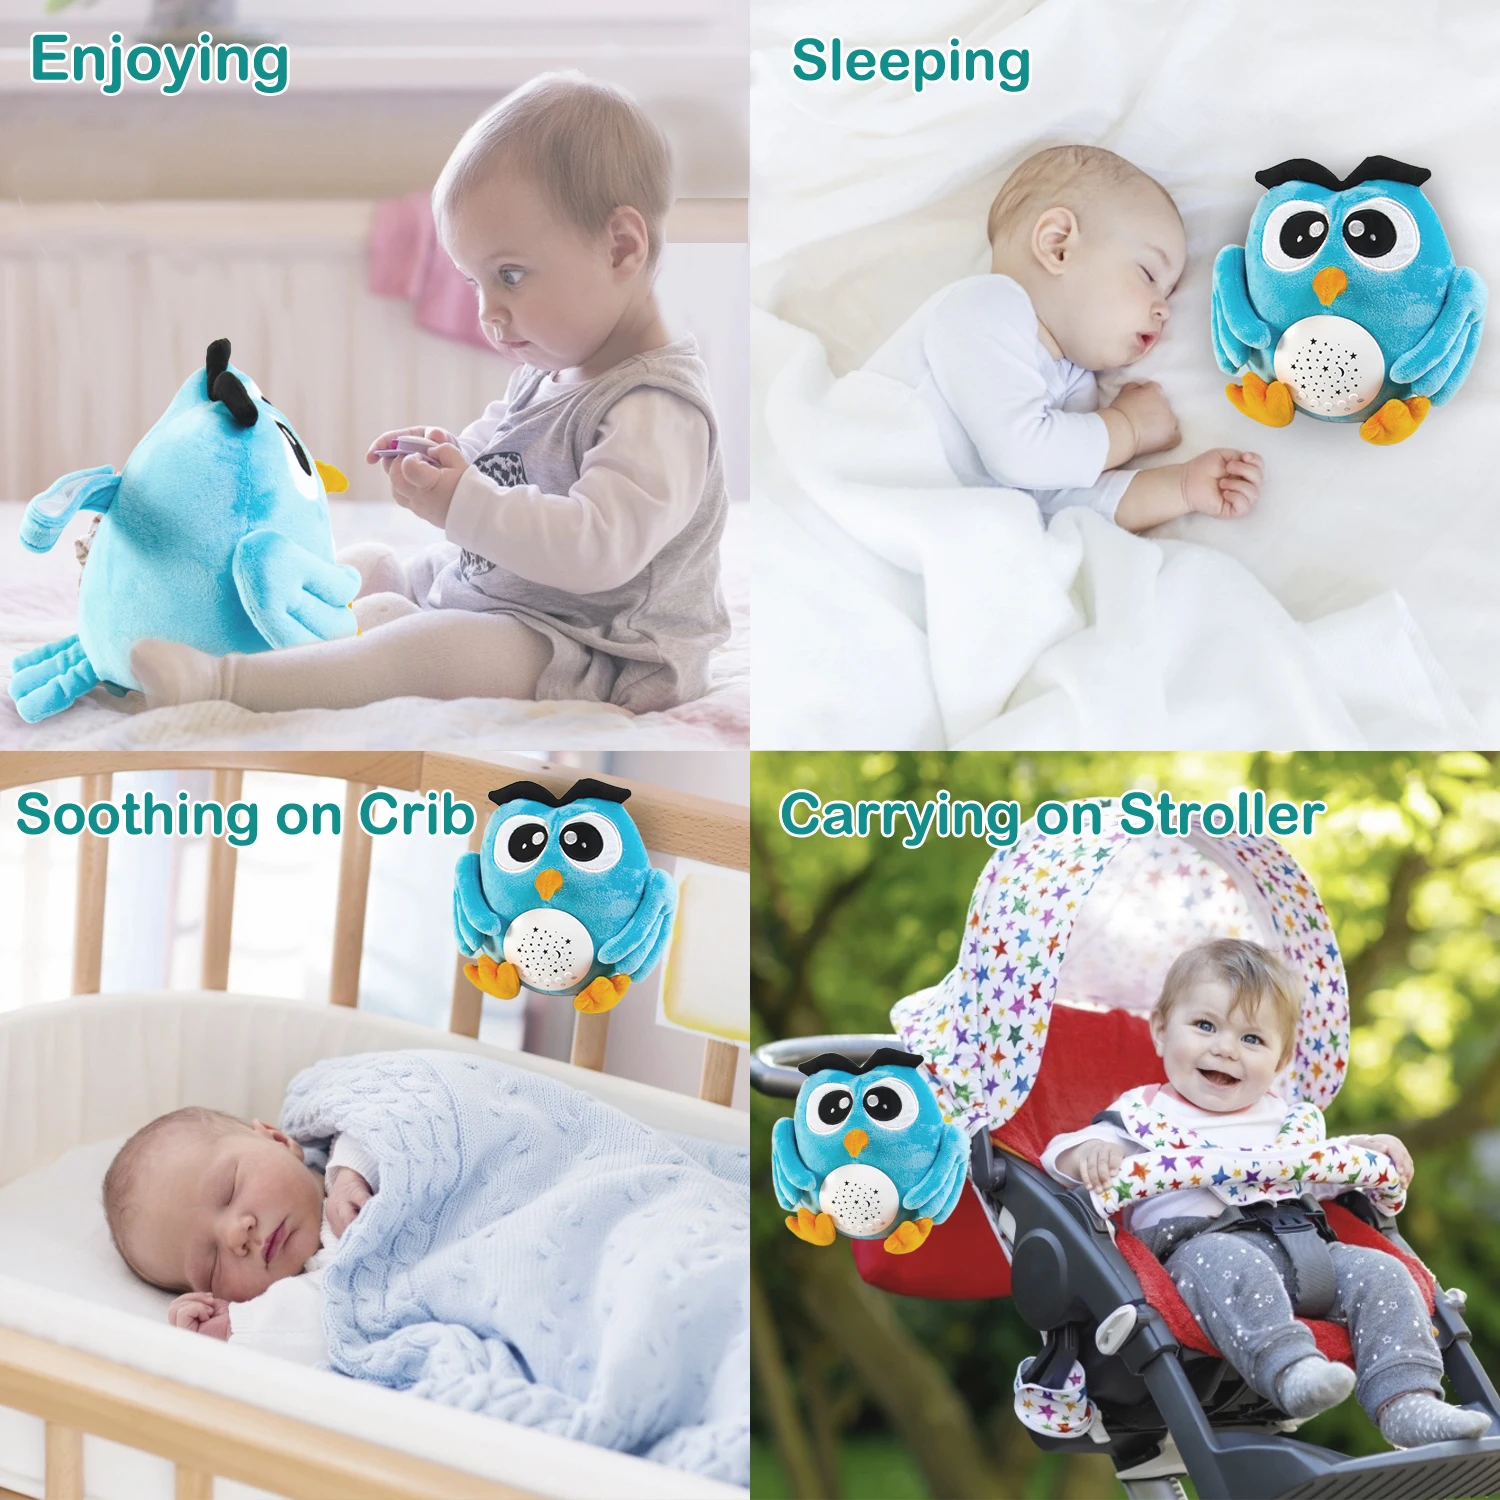 Baby Sleep Aid Stuffed Owl Plush Toy Soothing White Noise Sound LED Star Projector